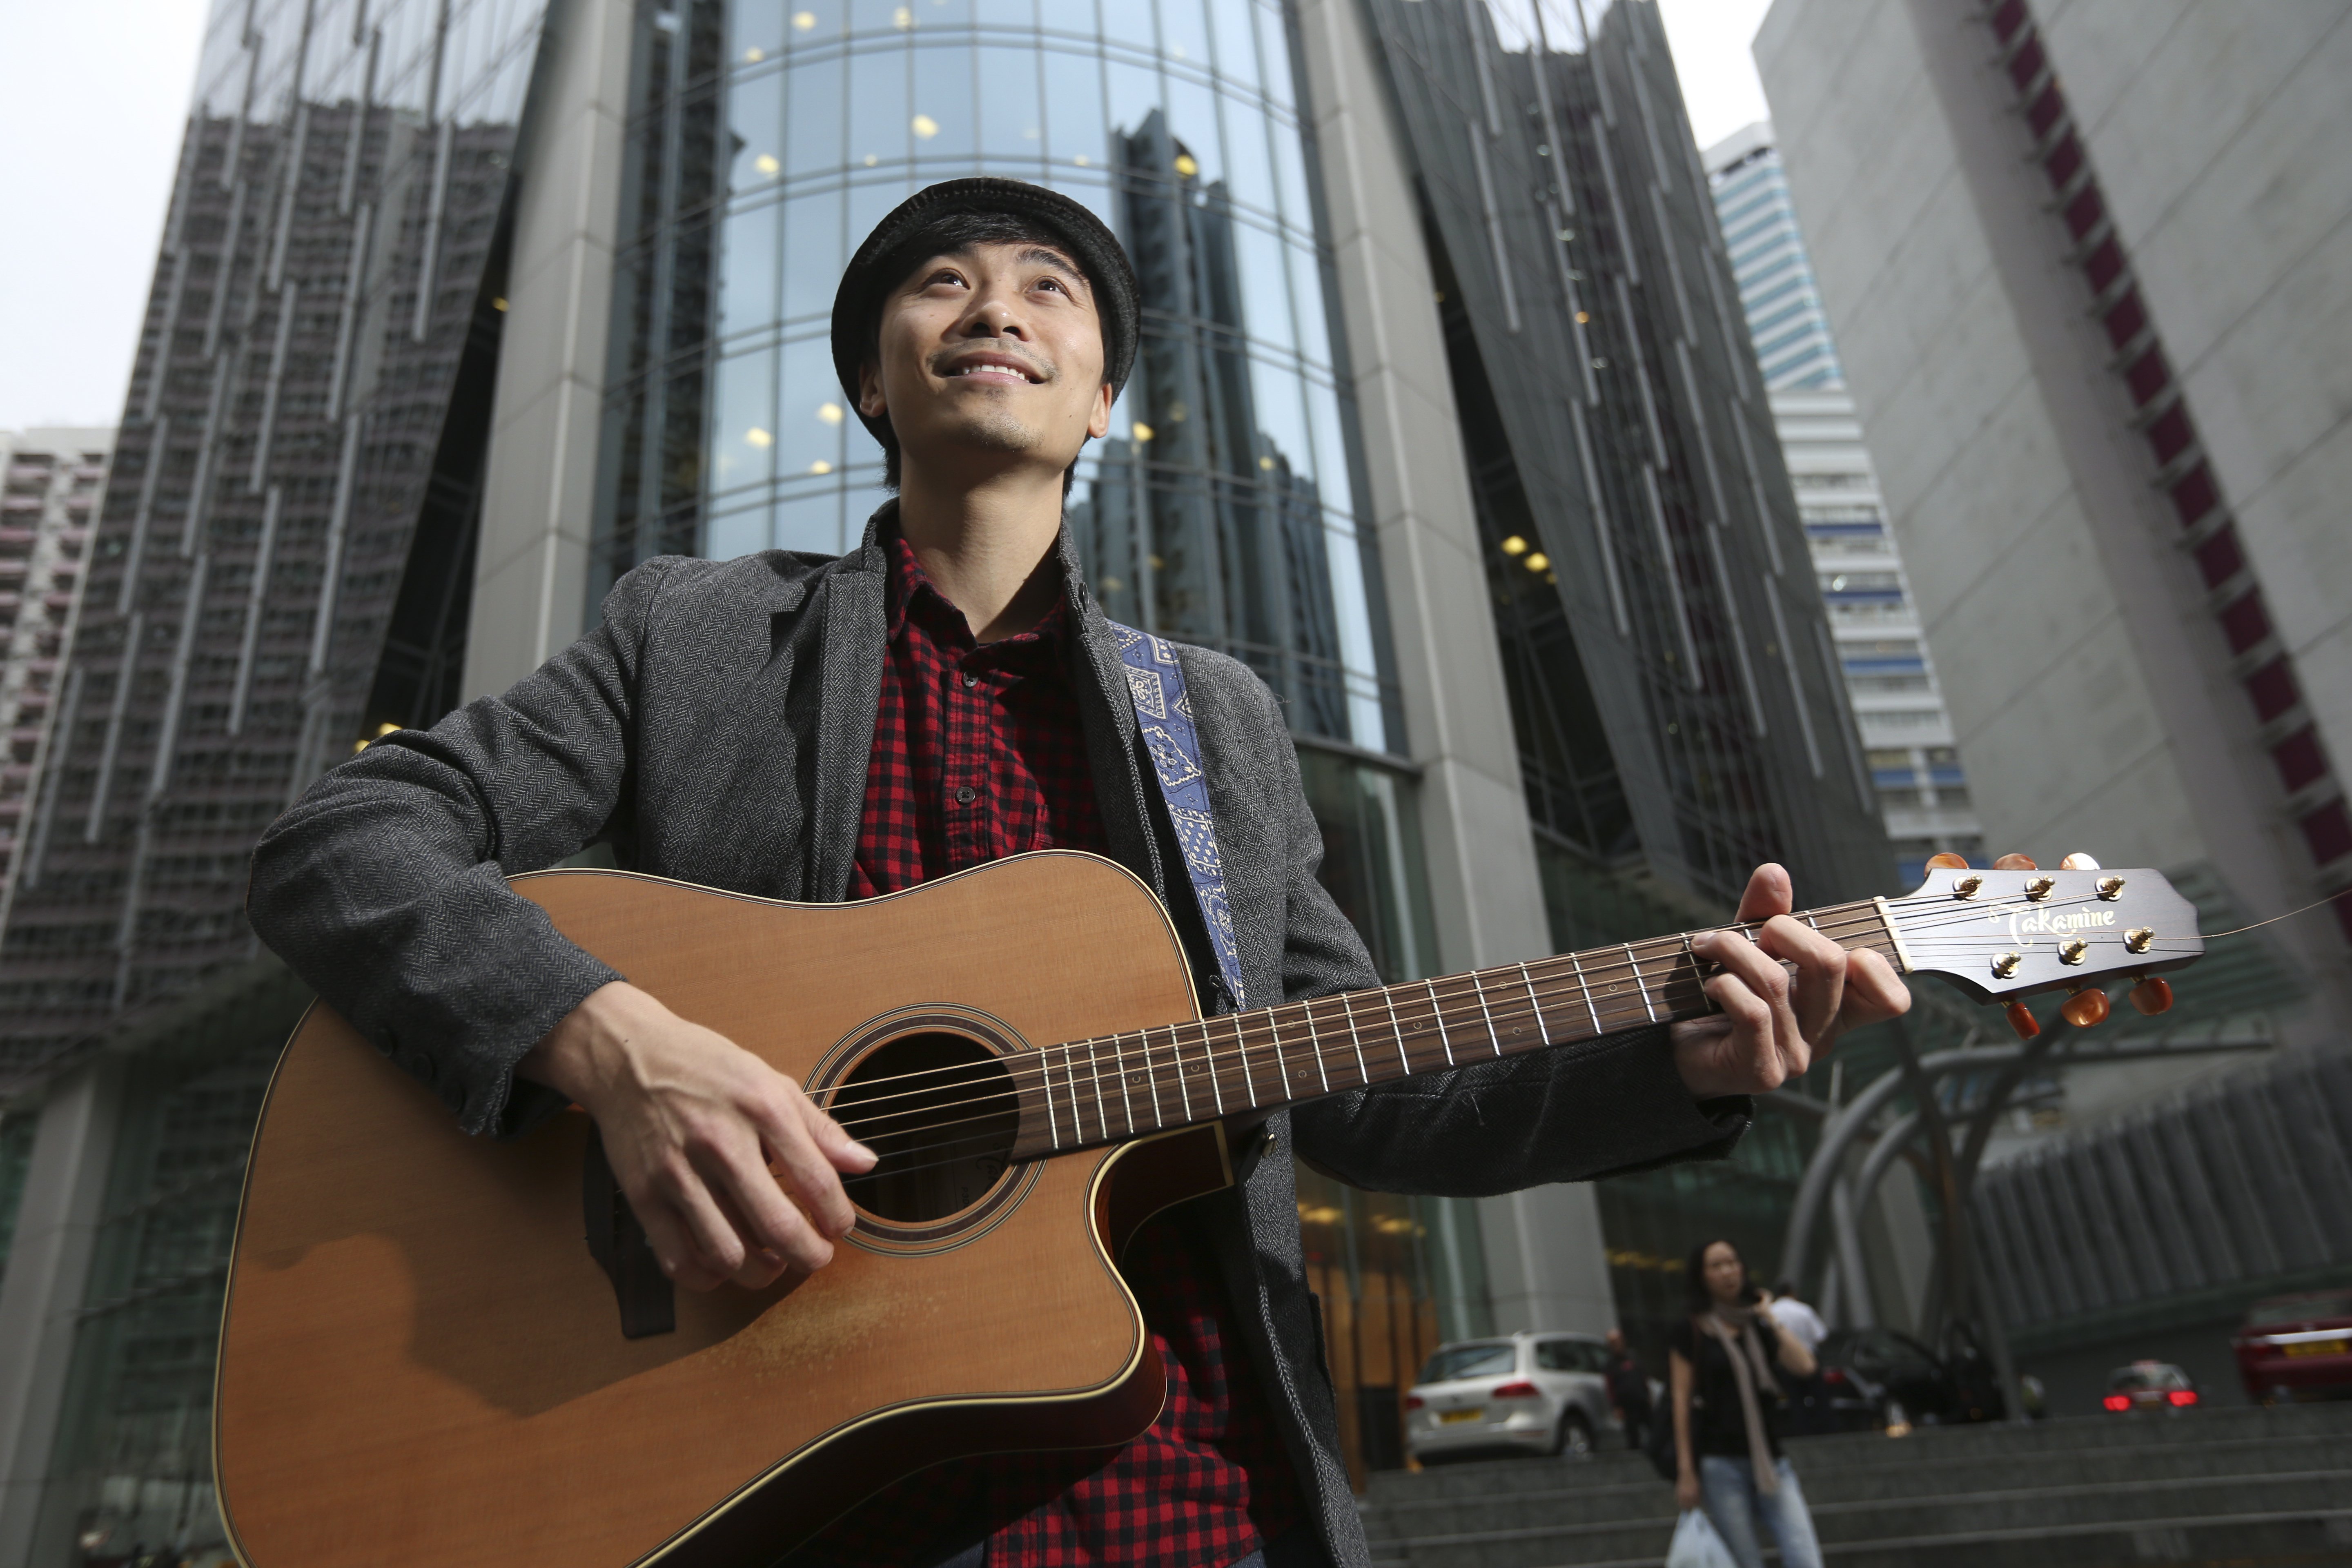 When you step into the world ... you realise there are things which don't matter and they become easier to let go," says Kimman, who left Hong Kong with a guitar on his back after the death of his mother, and ended up on TV talent shows. Photos: Nora Tam